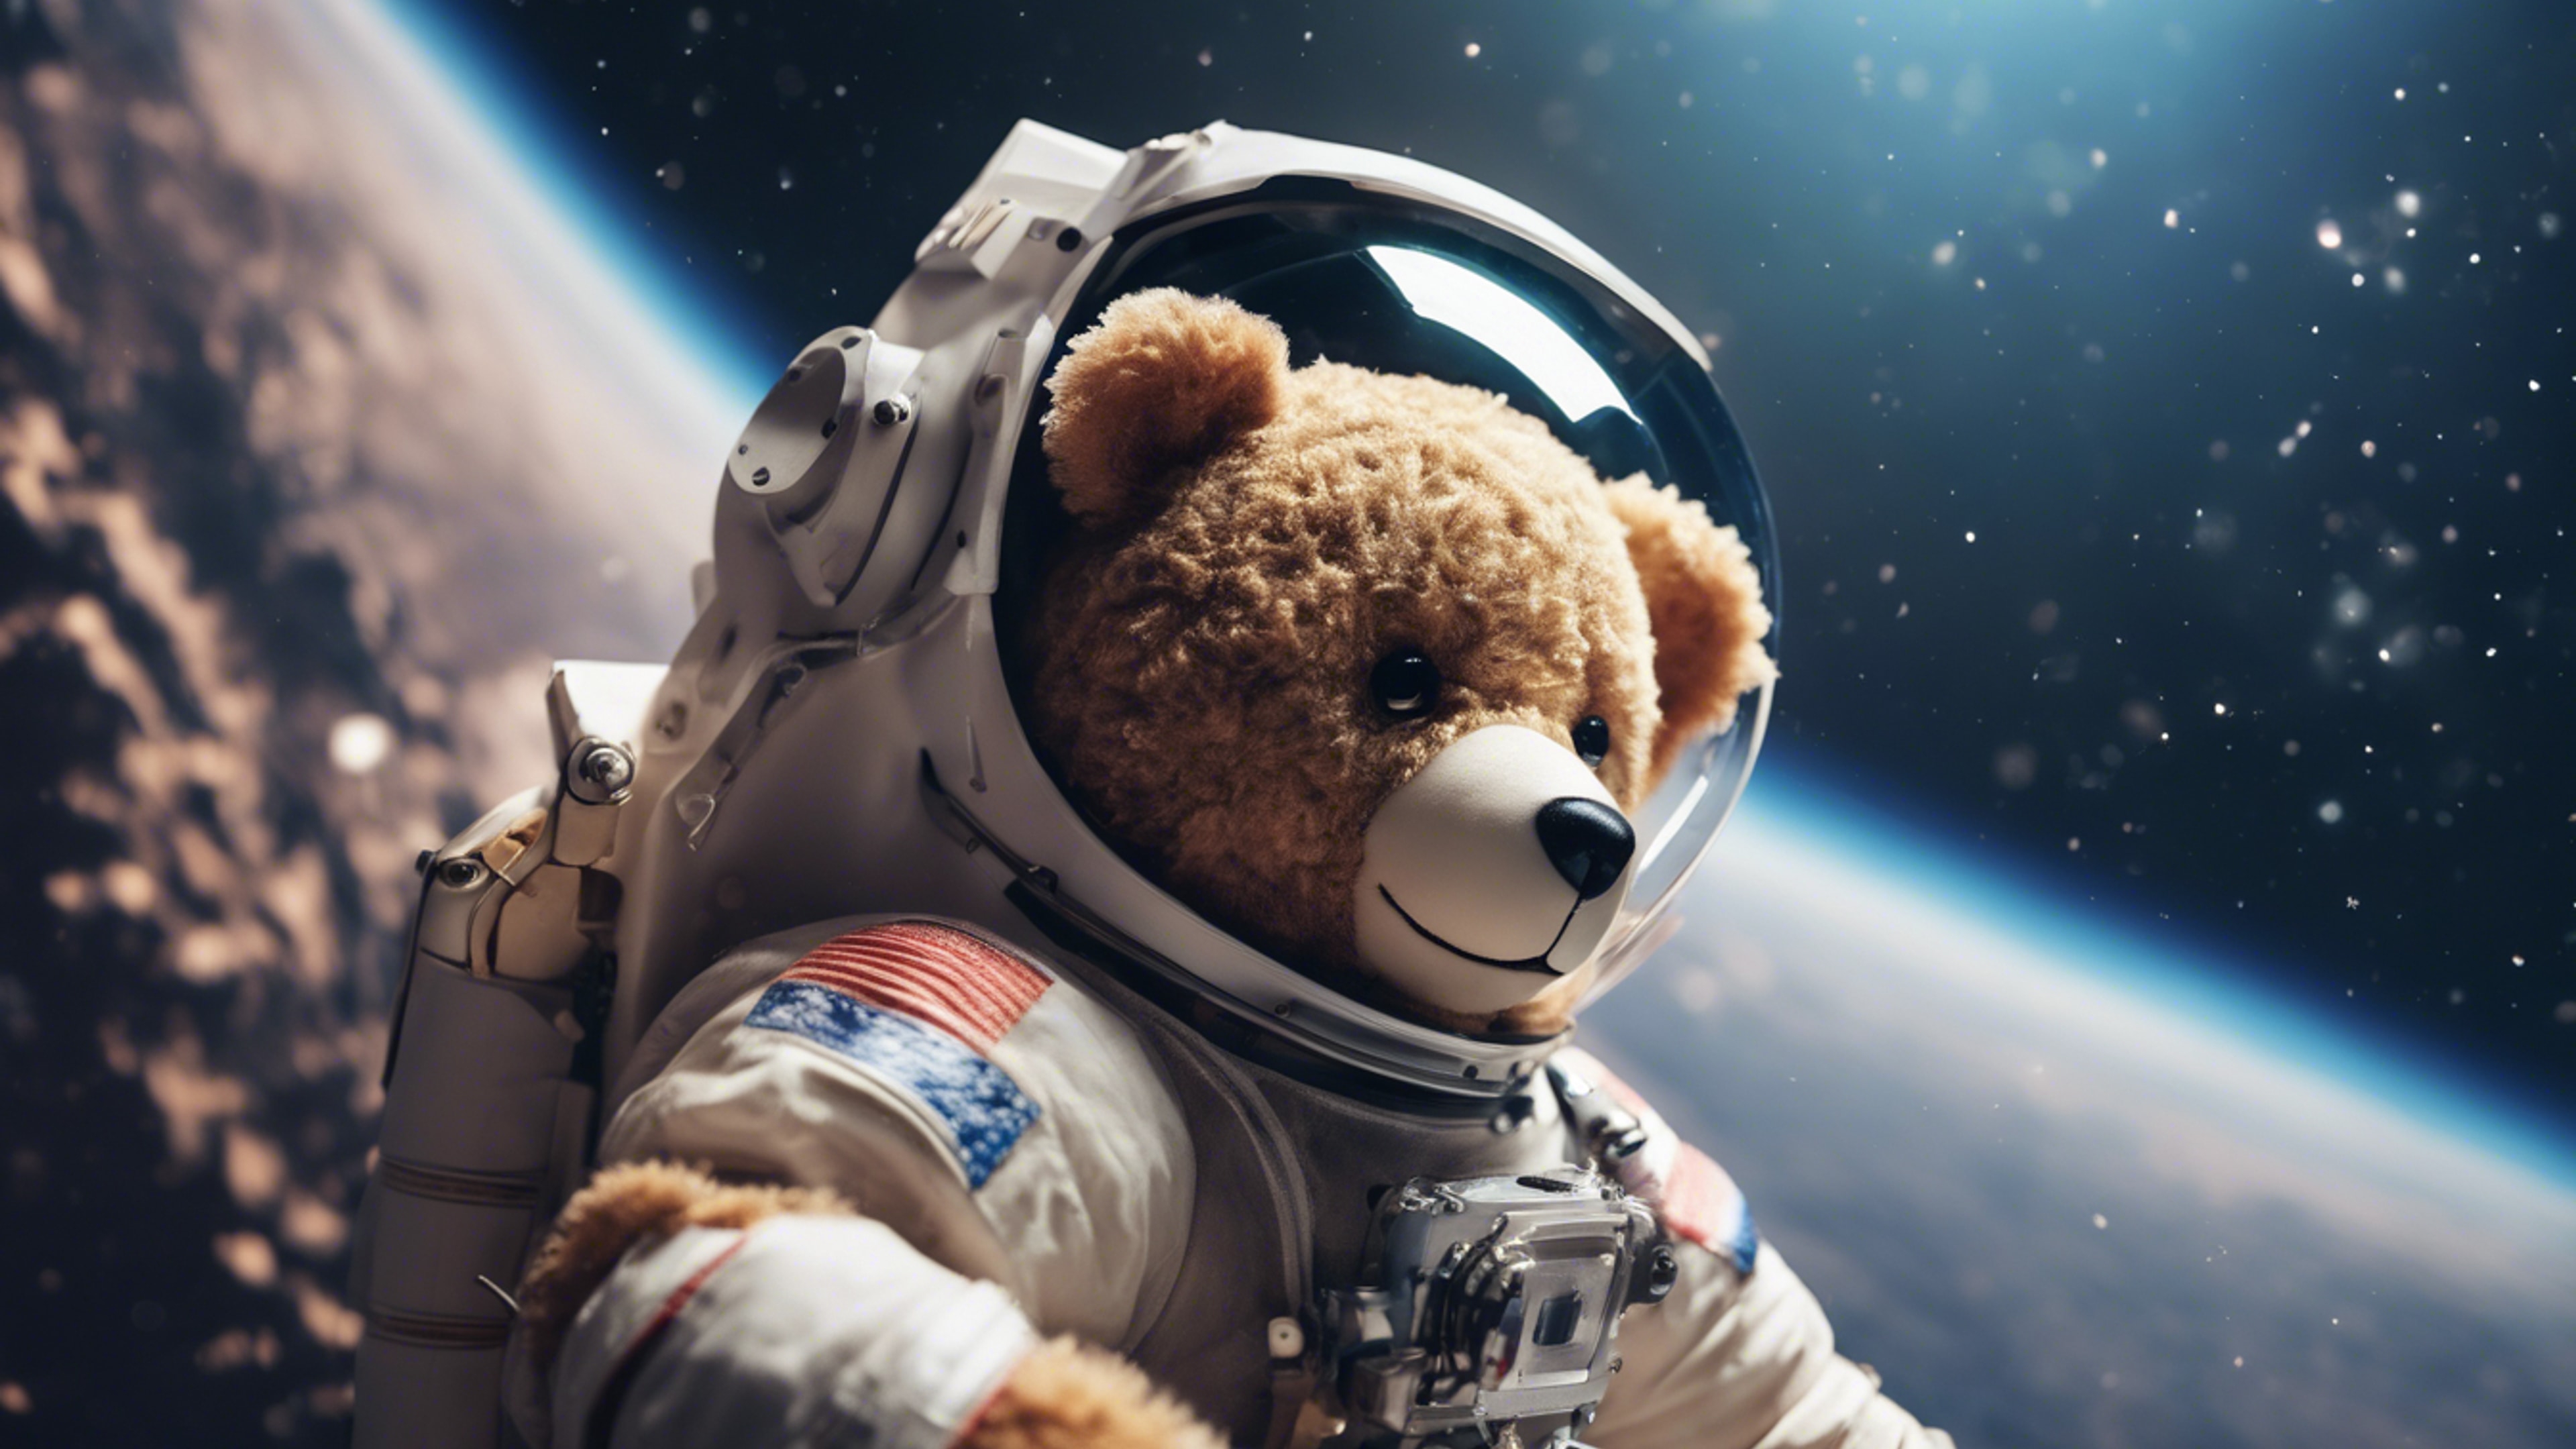 A teddy bear astronaut floating in space. Tapeet[264e253f630141468c44]